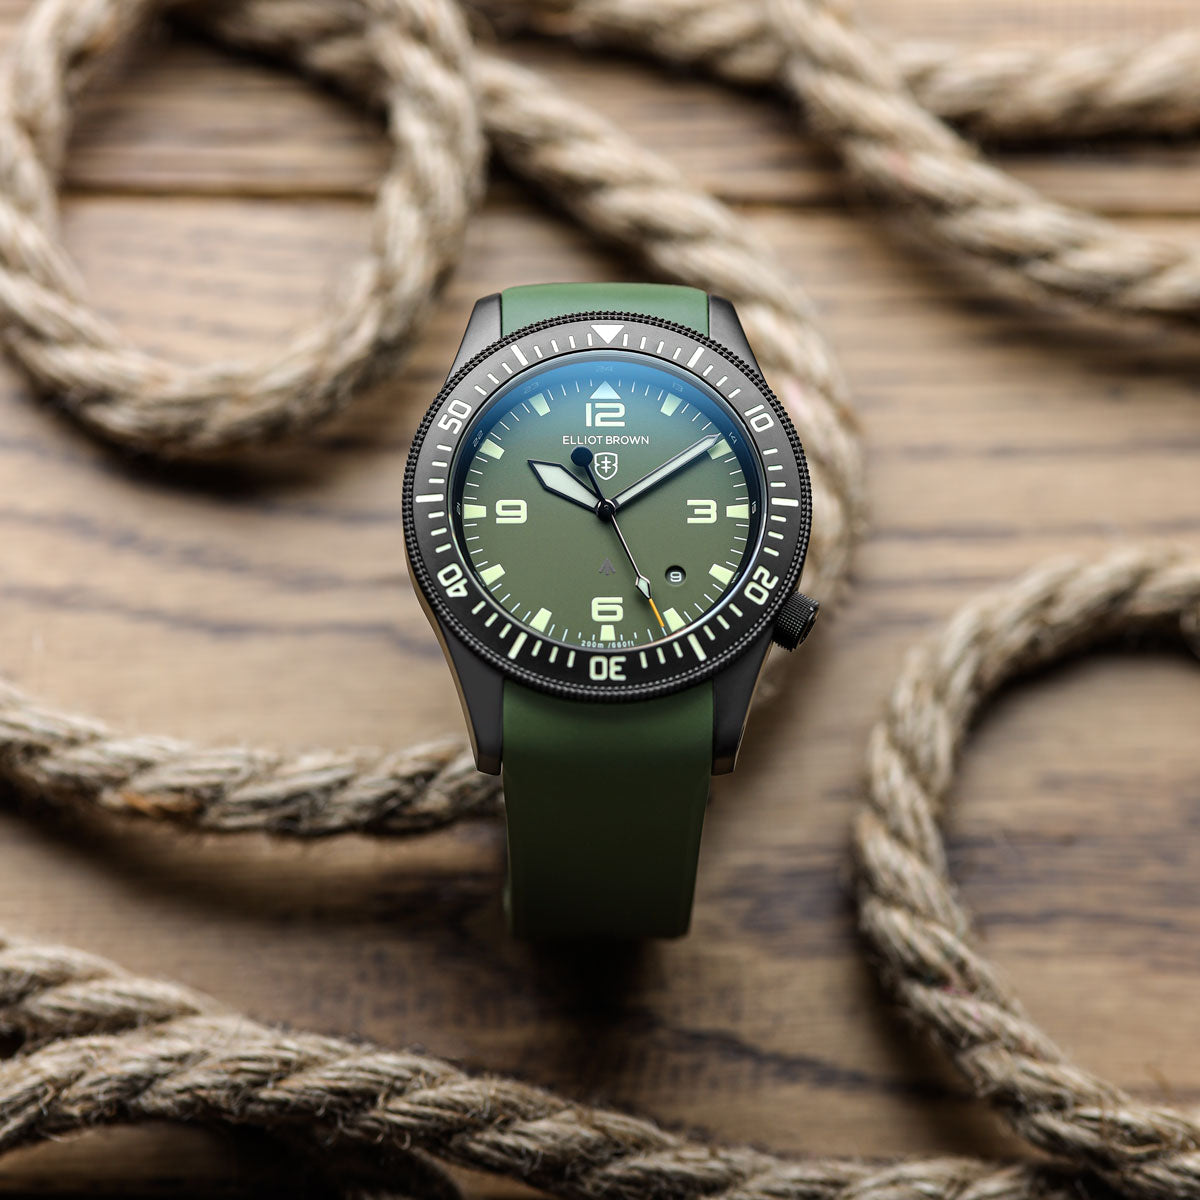 Elliot Brown Holton Professional 101-002-R04 - Olive green - additional image 2